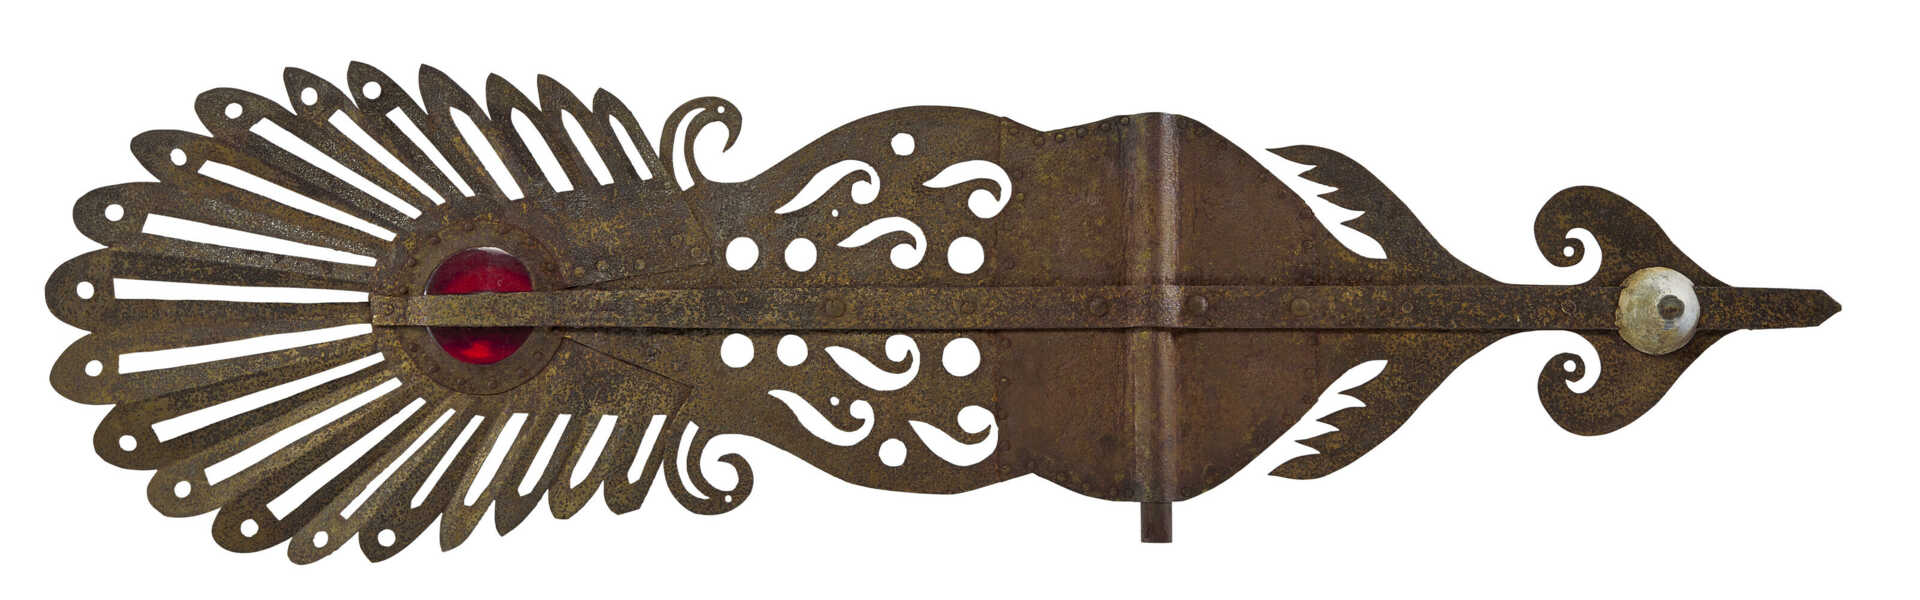 A STYLIZED PEACOCK FEATHER SHEET-IRON, ZINC AND GLASS CHURCH BANNER WEATHERVANE